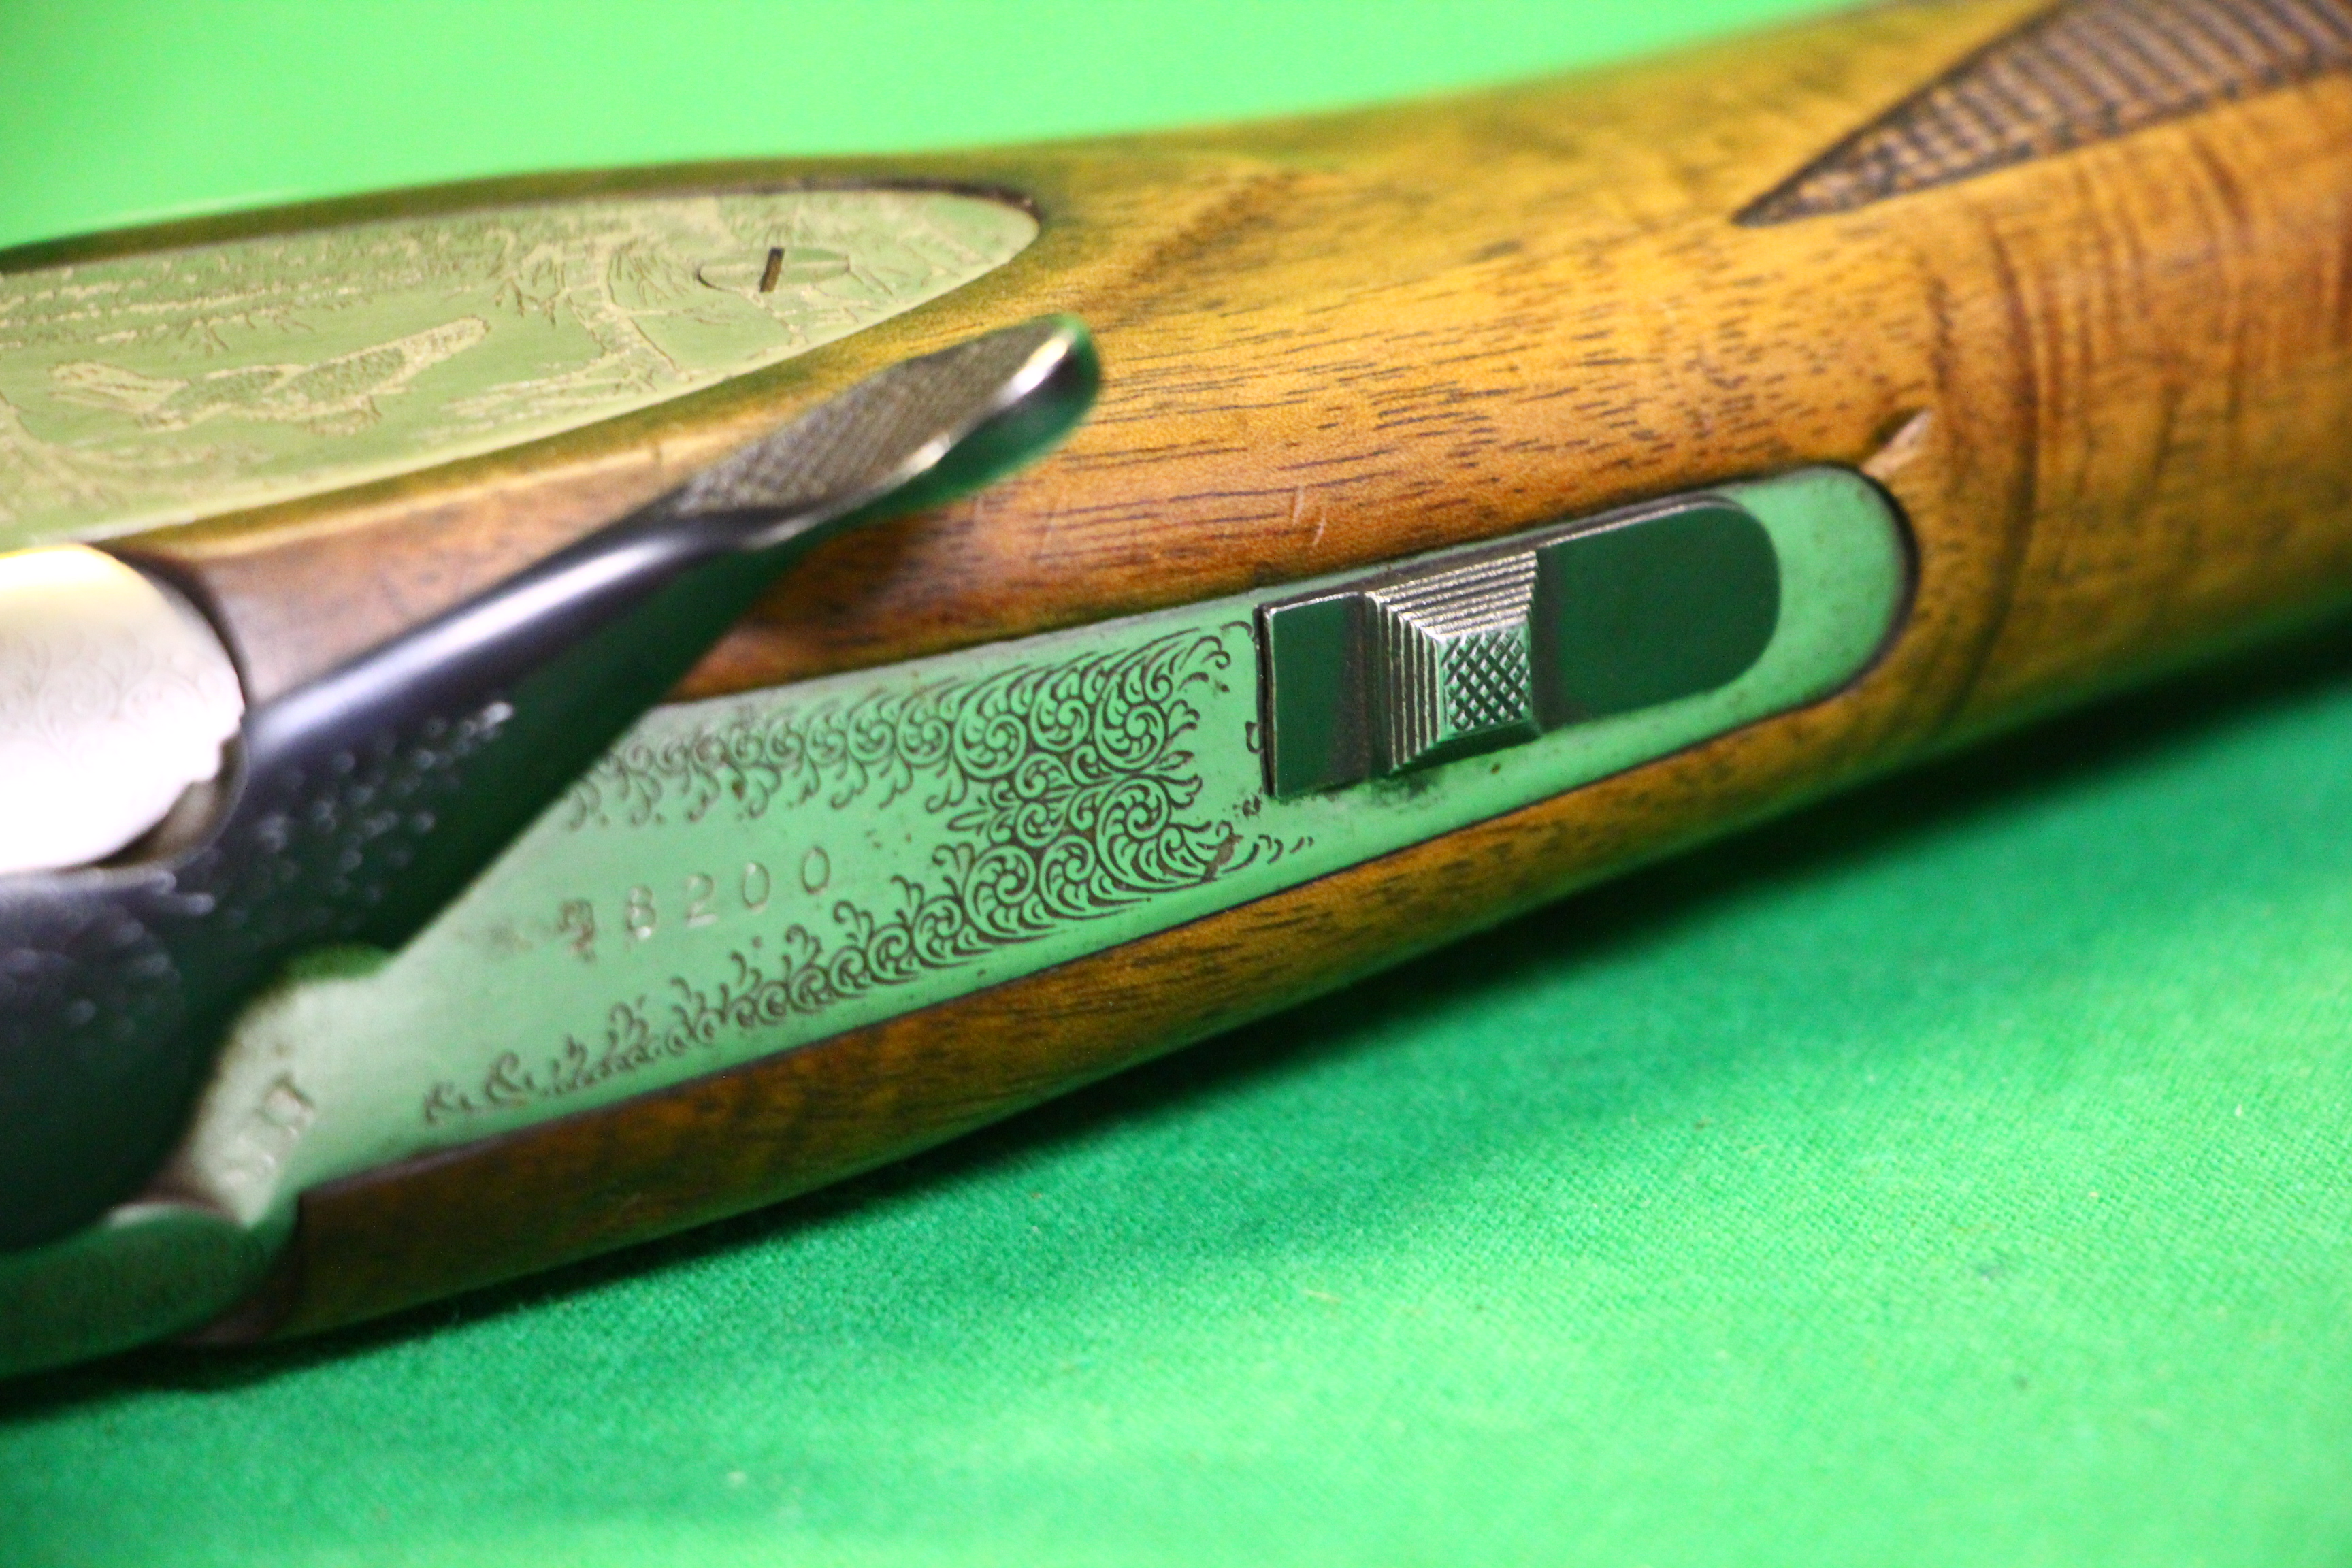 BETTINSOLI 12 BORE OVER AND UNDER SHOTGUN #98200 5 CHOKES AND KEY - (ALL GUNS TO BE INSPECTED AND - Image 13 of 13